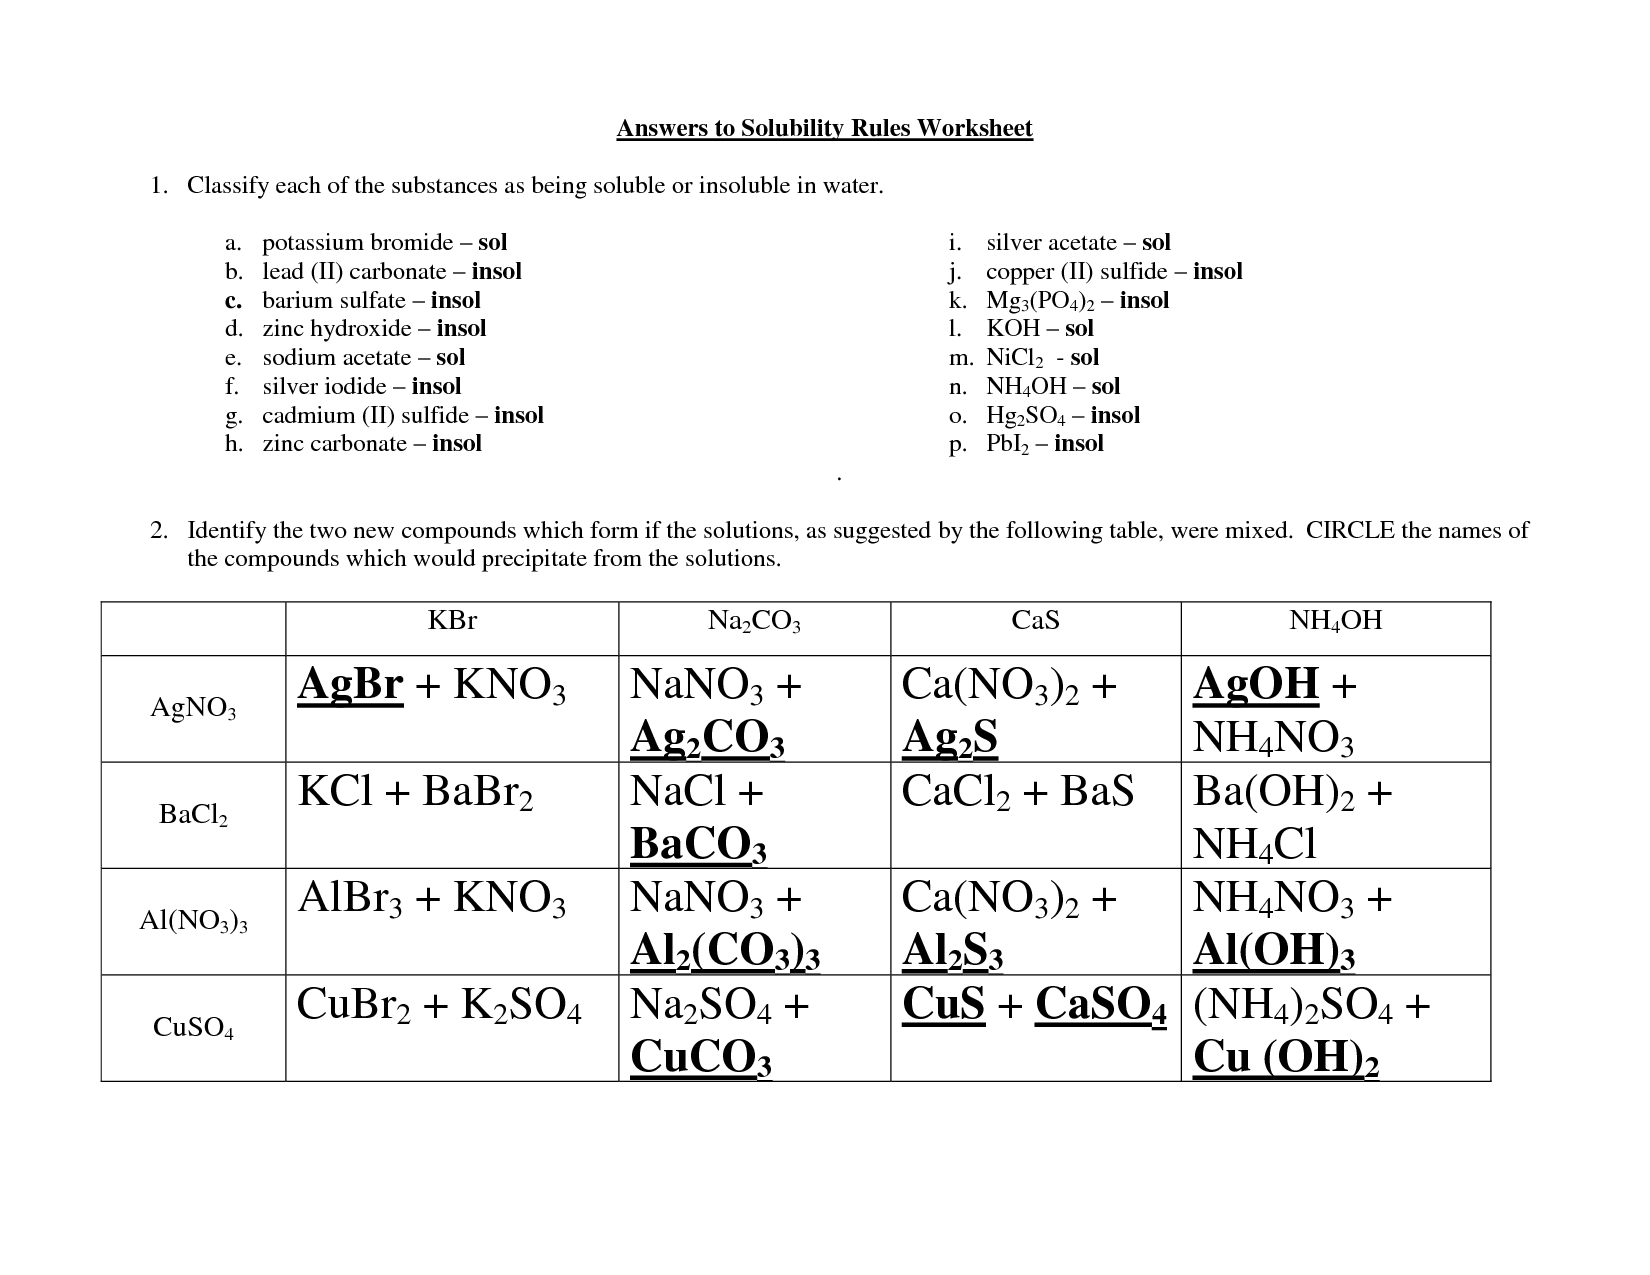 using-solubility-rules-worksheet-free-download-qstion-co